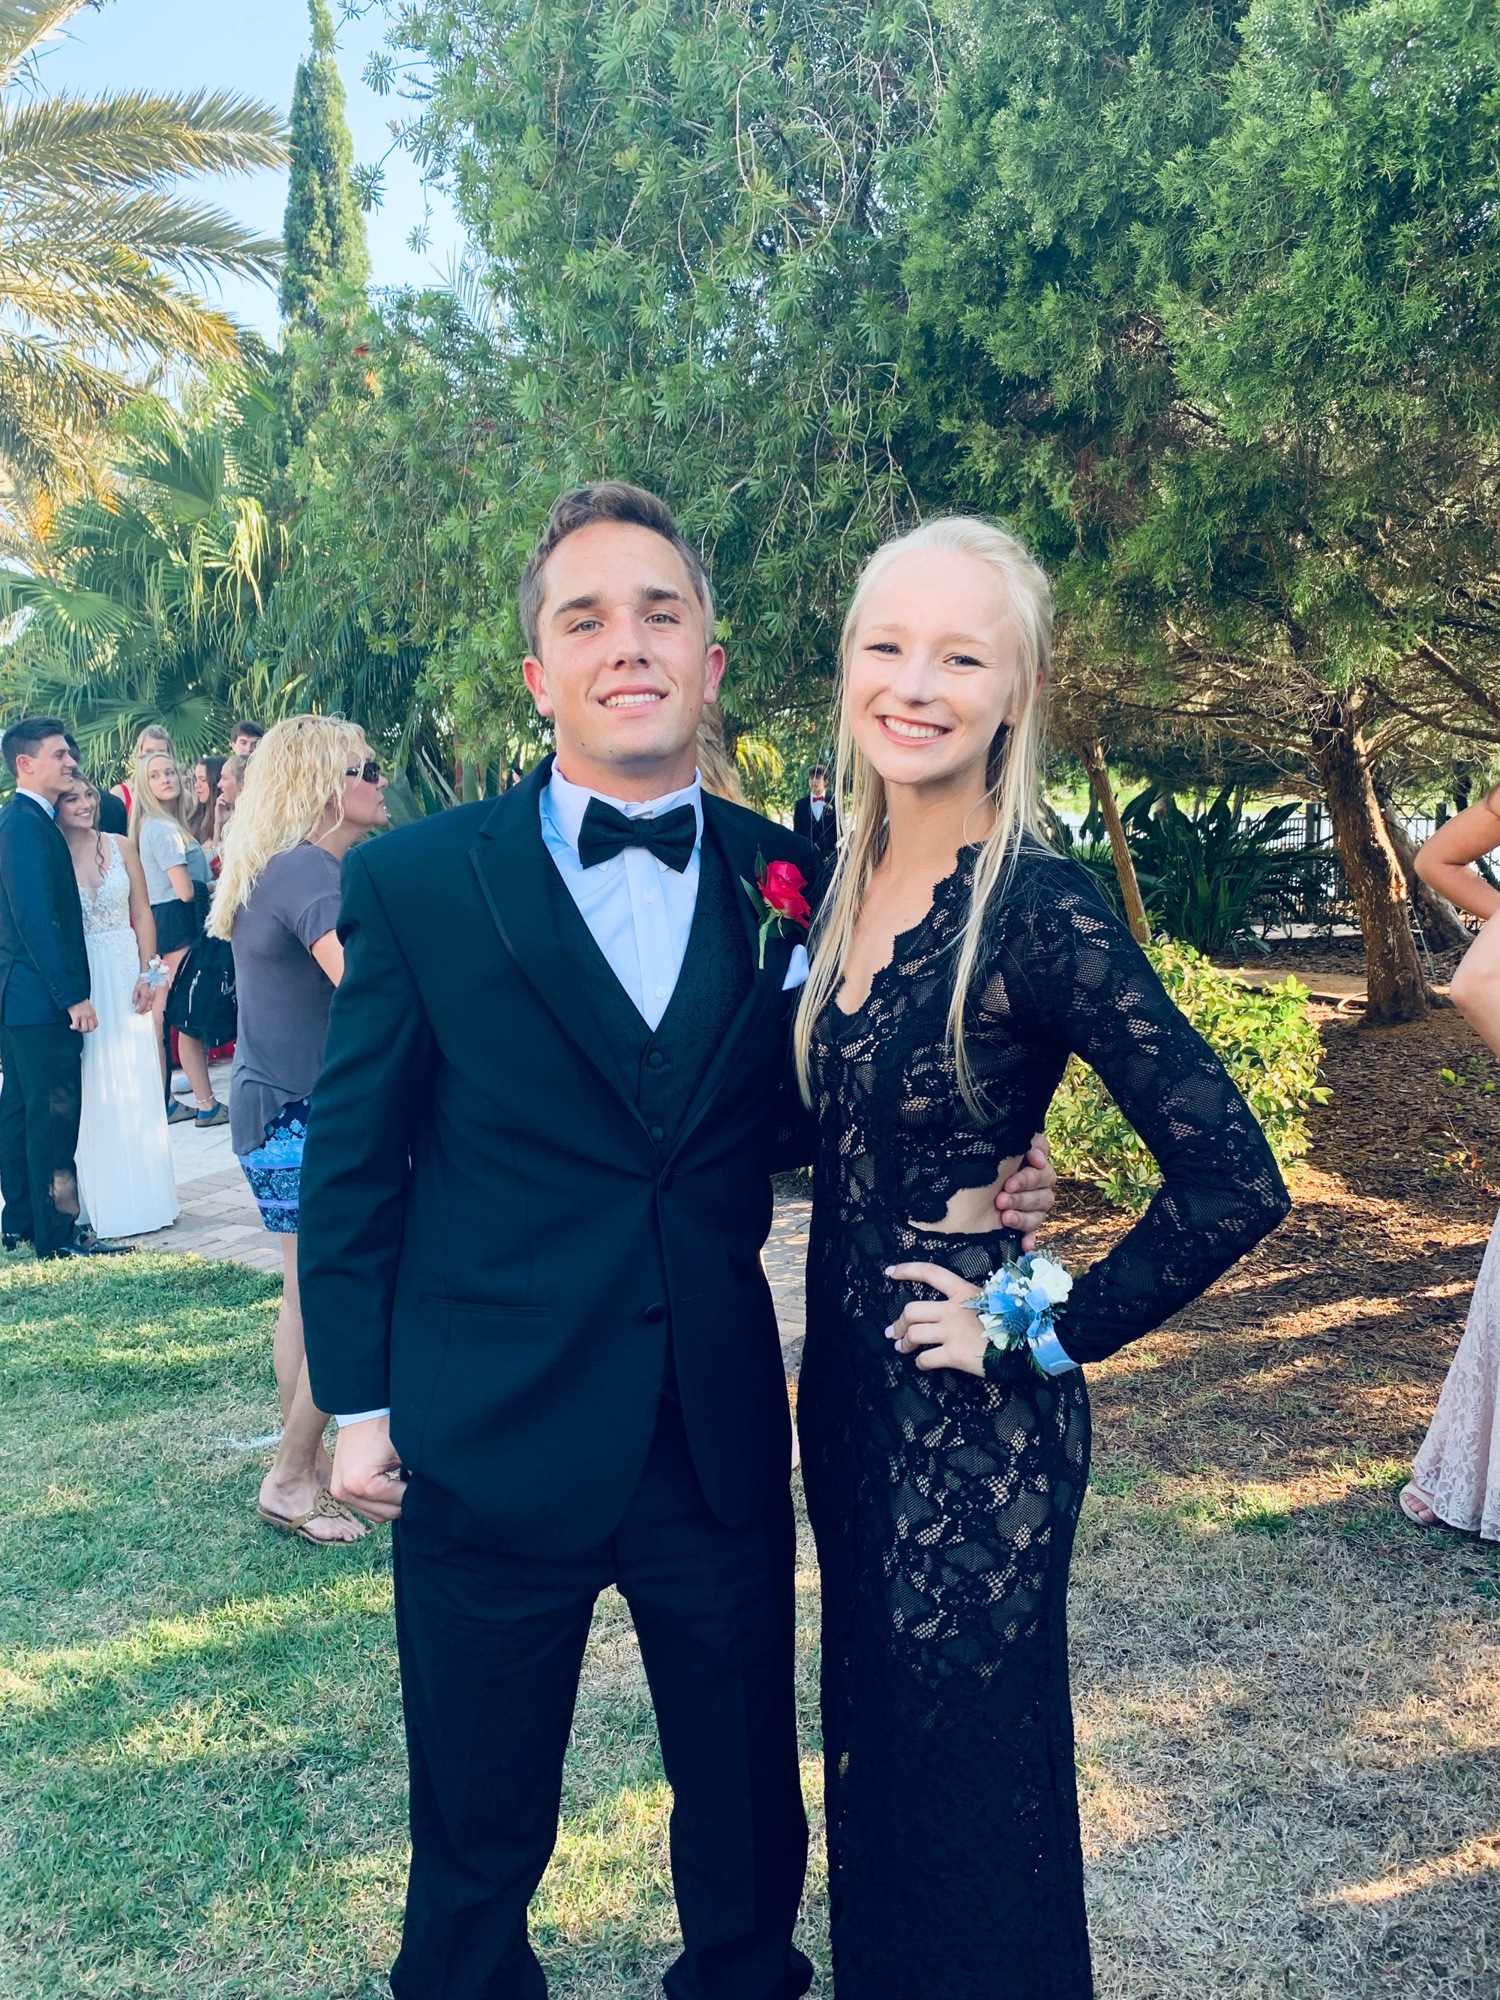 Alec Frank and Caroline Lafoe have maintained a strong friendship from preschool at Primrose through high school graduation.